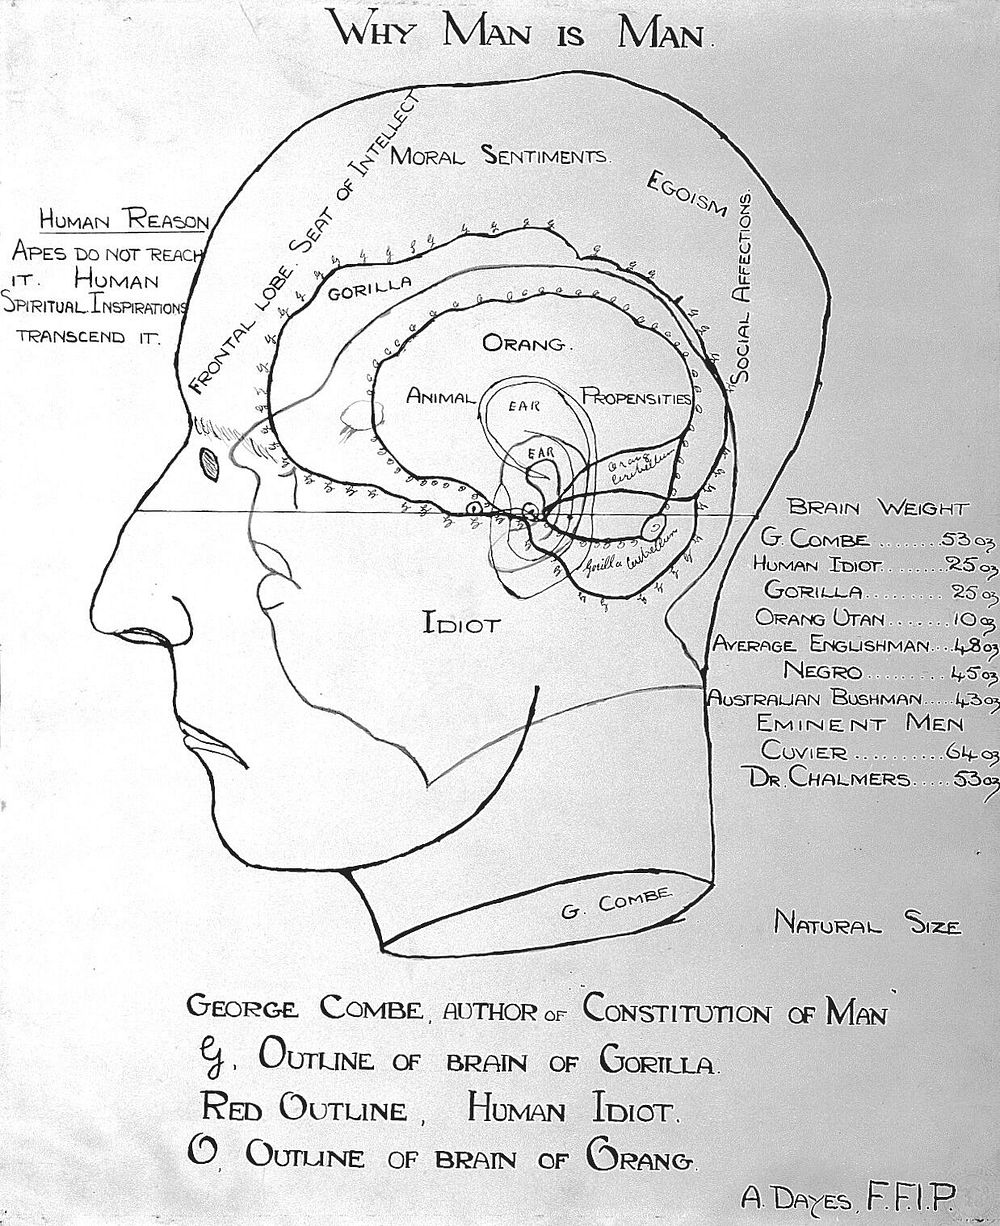 Phrenology: the human and animal brain, the location of its functions according to the principles of phrenology, and…